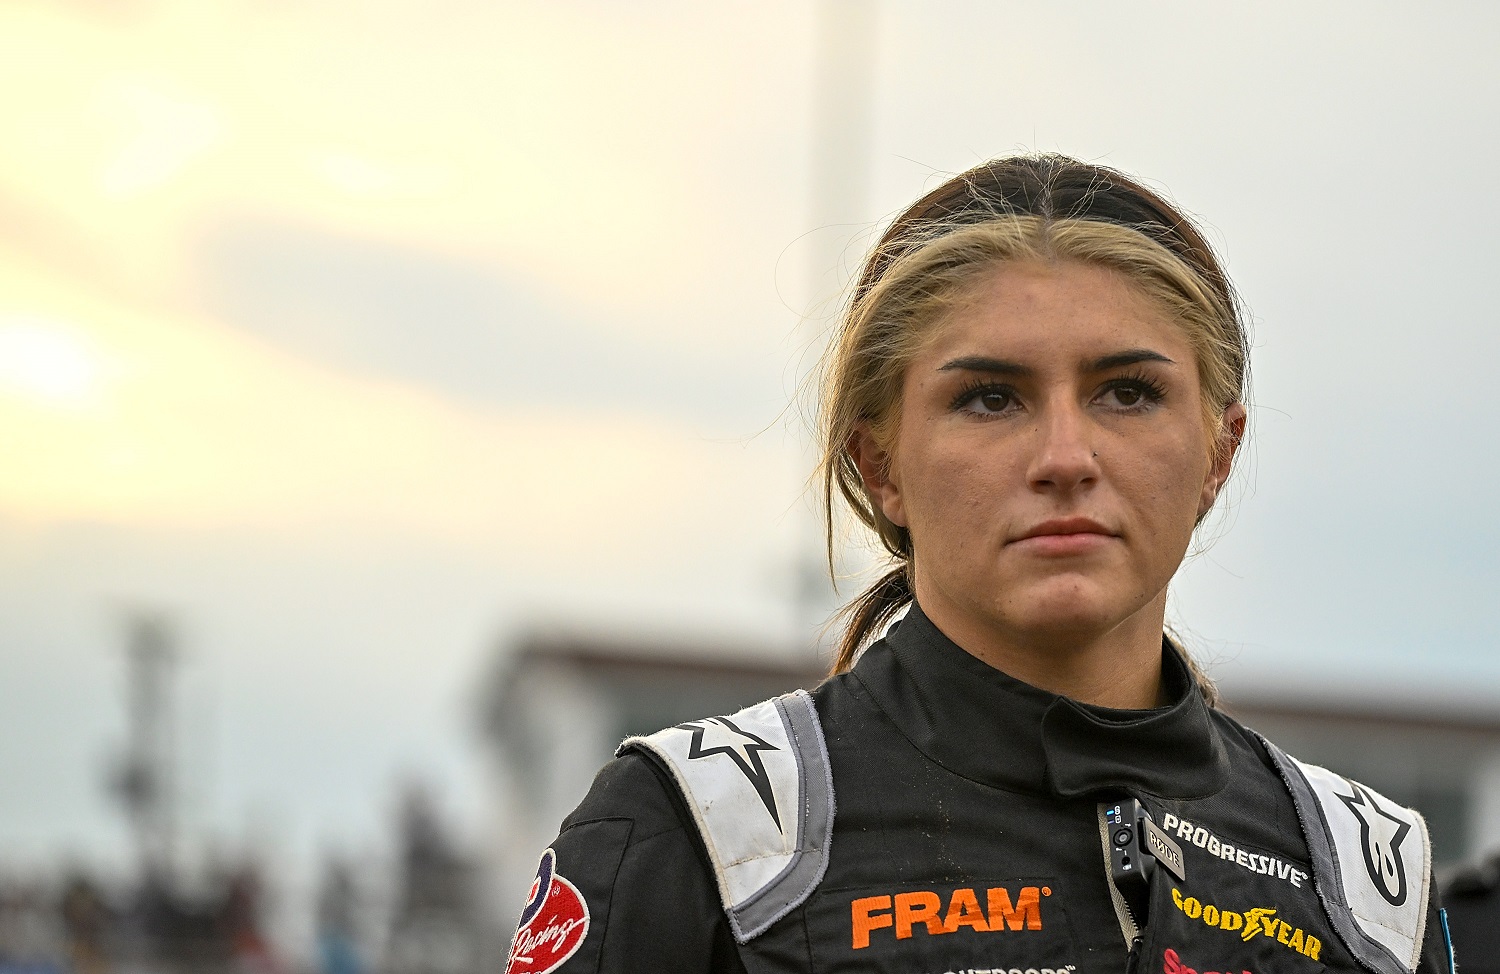 Hailie Deegan looks on during a heat race at a Camping World Superstar Racing Experience at I-55 Raceway on July 16, 2022. | Jeff Curry/SRX/Getty Images